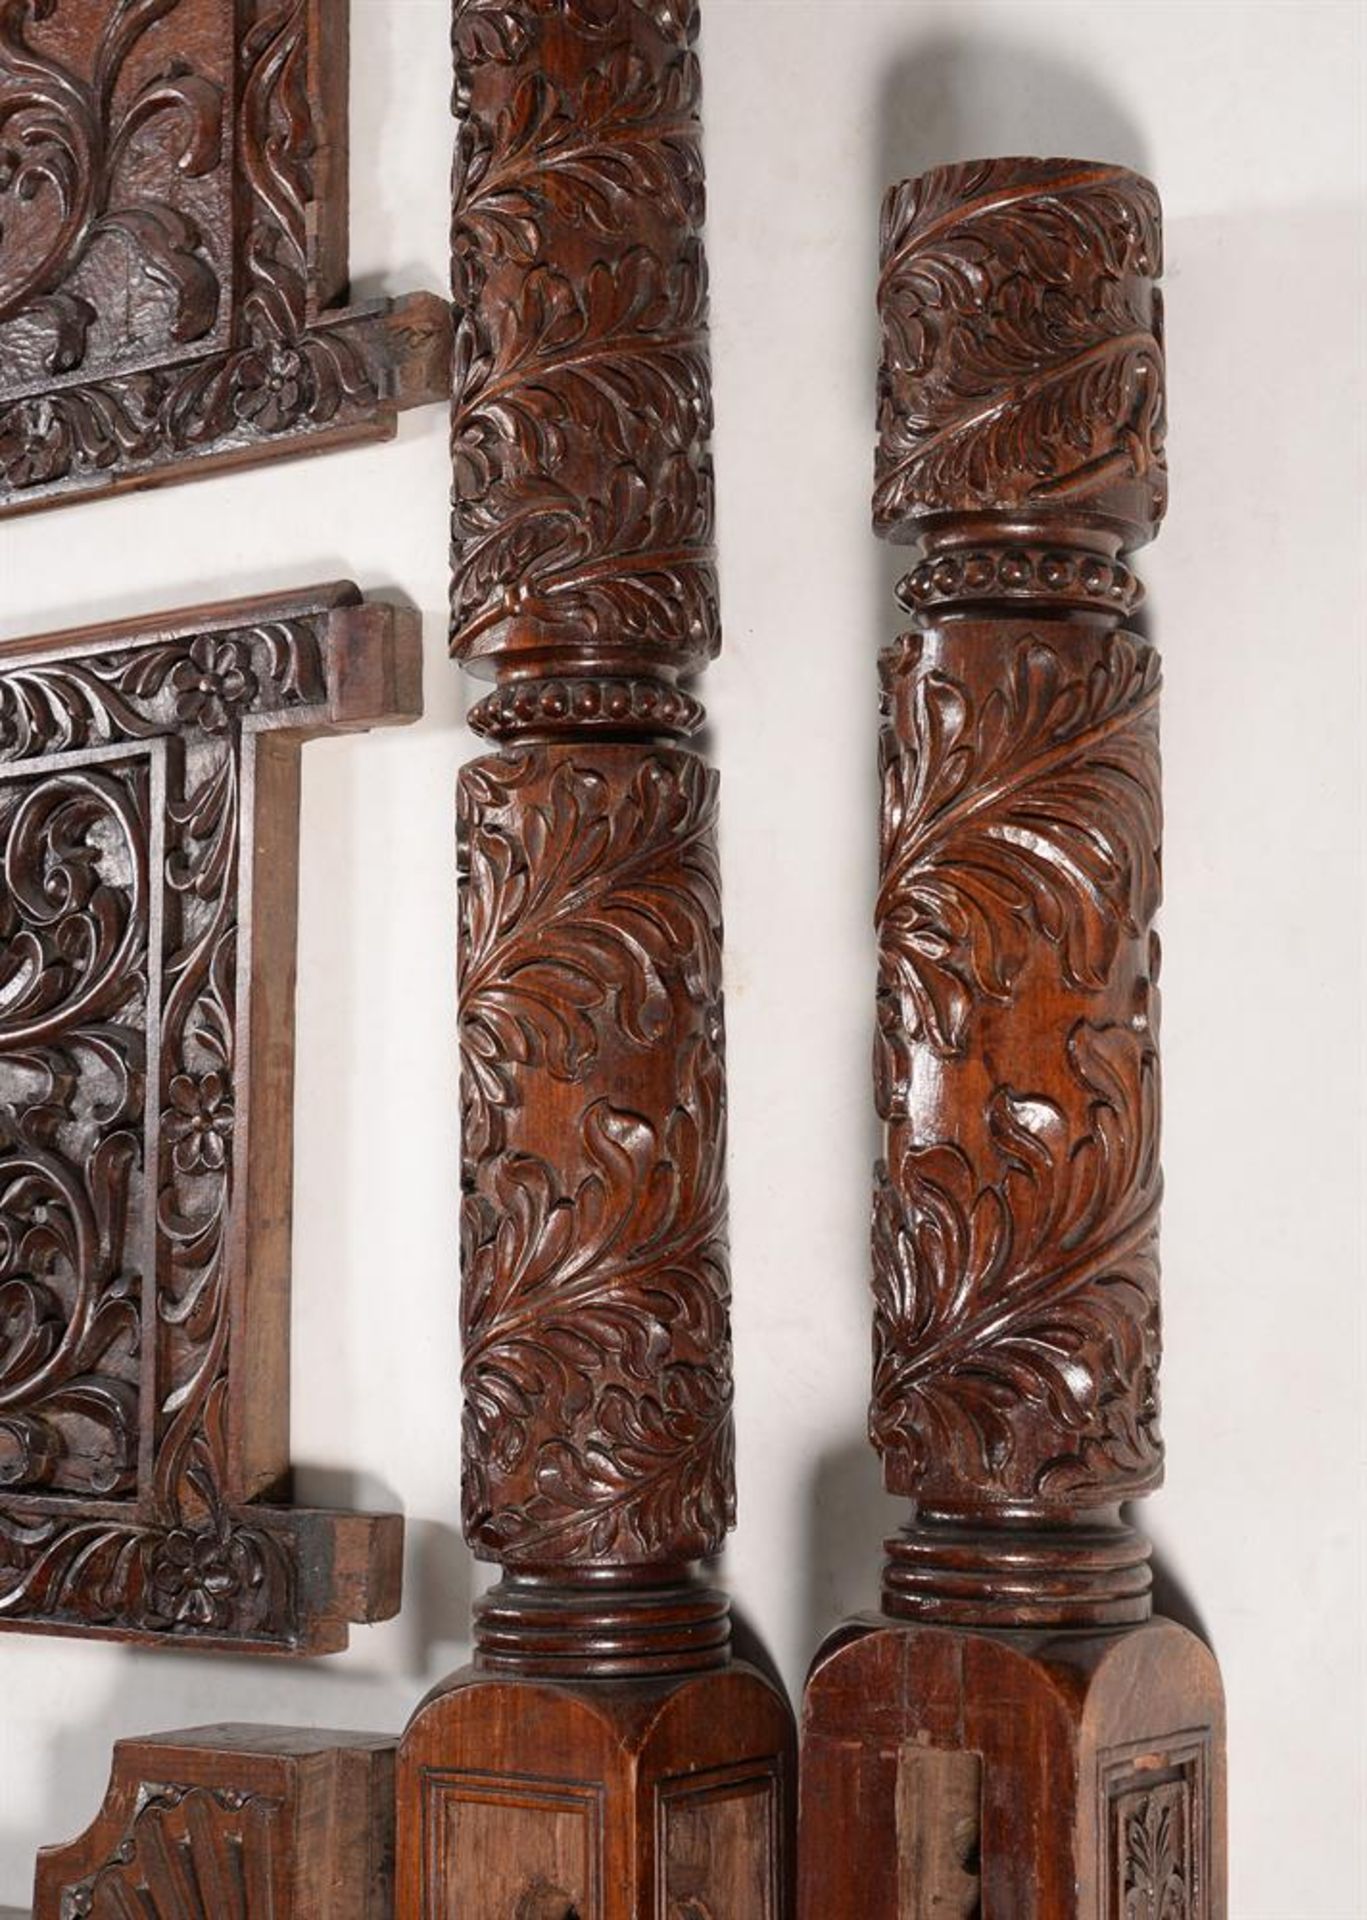 Y AN ANGLO-INDIAN CARVED ROSEWOOD FOUR POSTER BED - Image 4 of 7